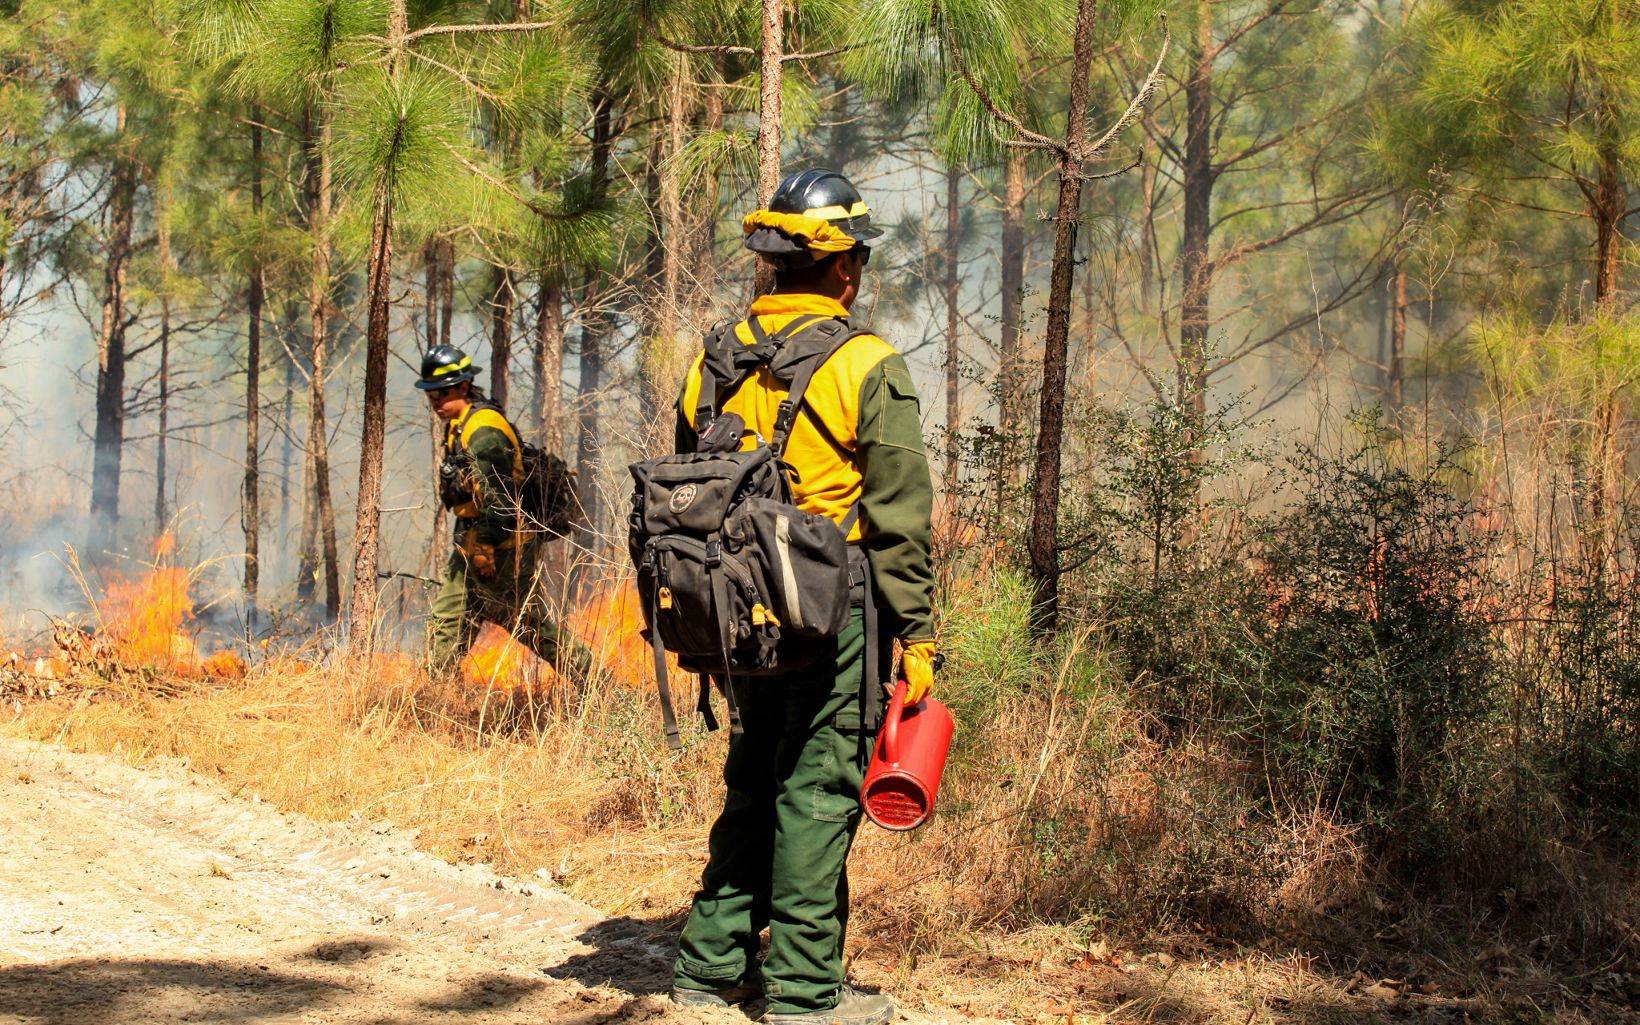 A Wildland Fire Management crew member emerges from heavily forested habitat, which he just lit on fire using a drip torch, as another crew member observes.